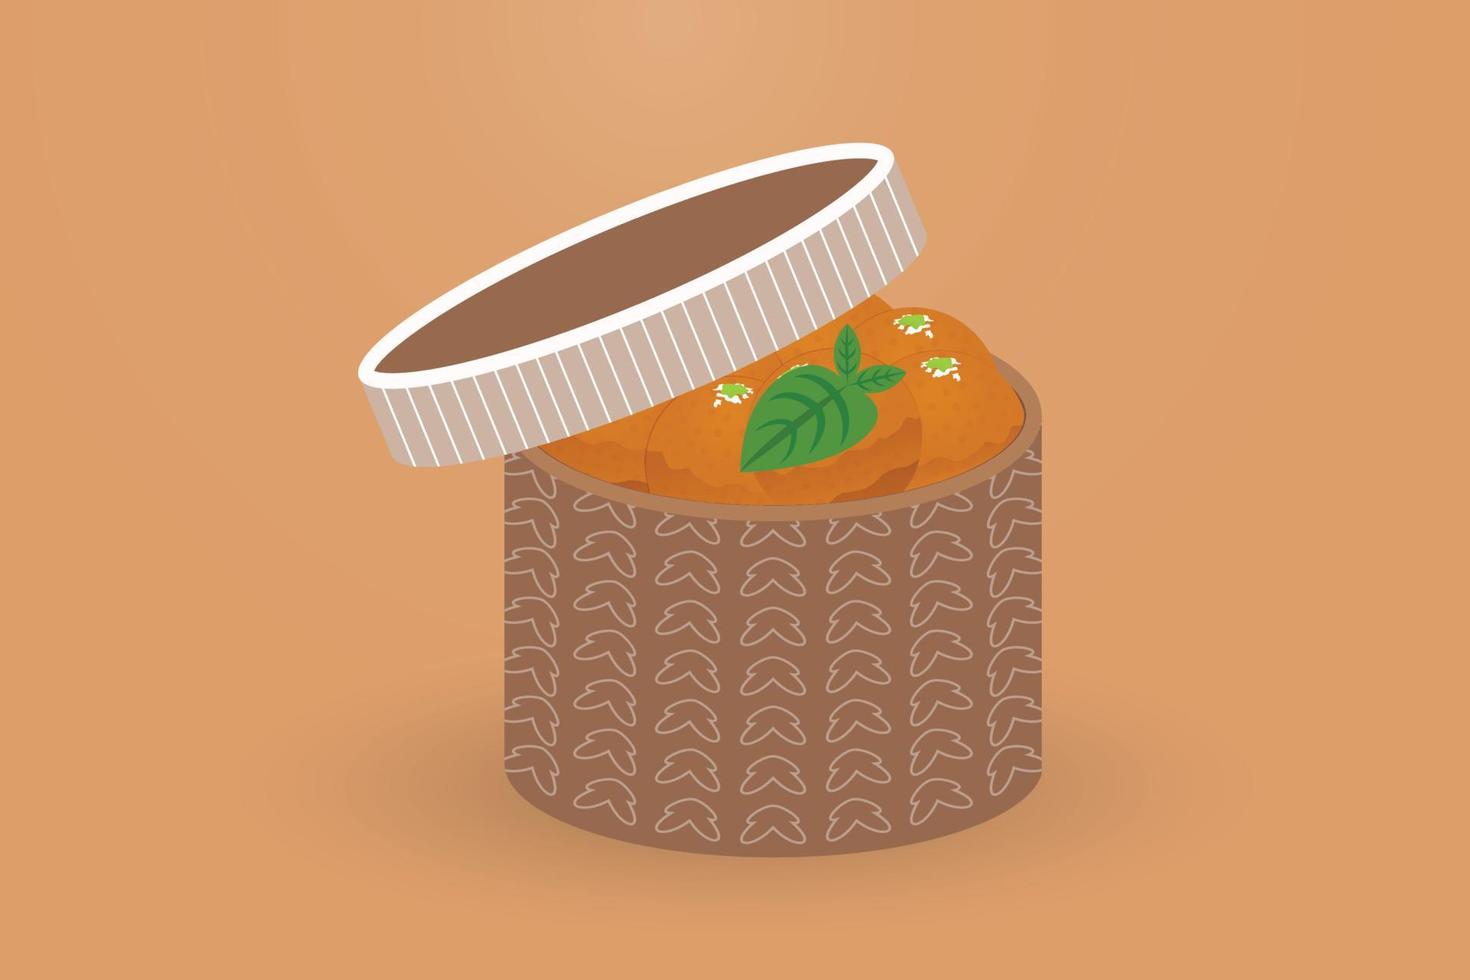 Laddoo with box vector design.